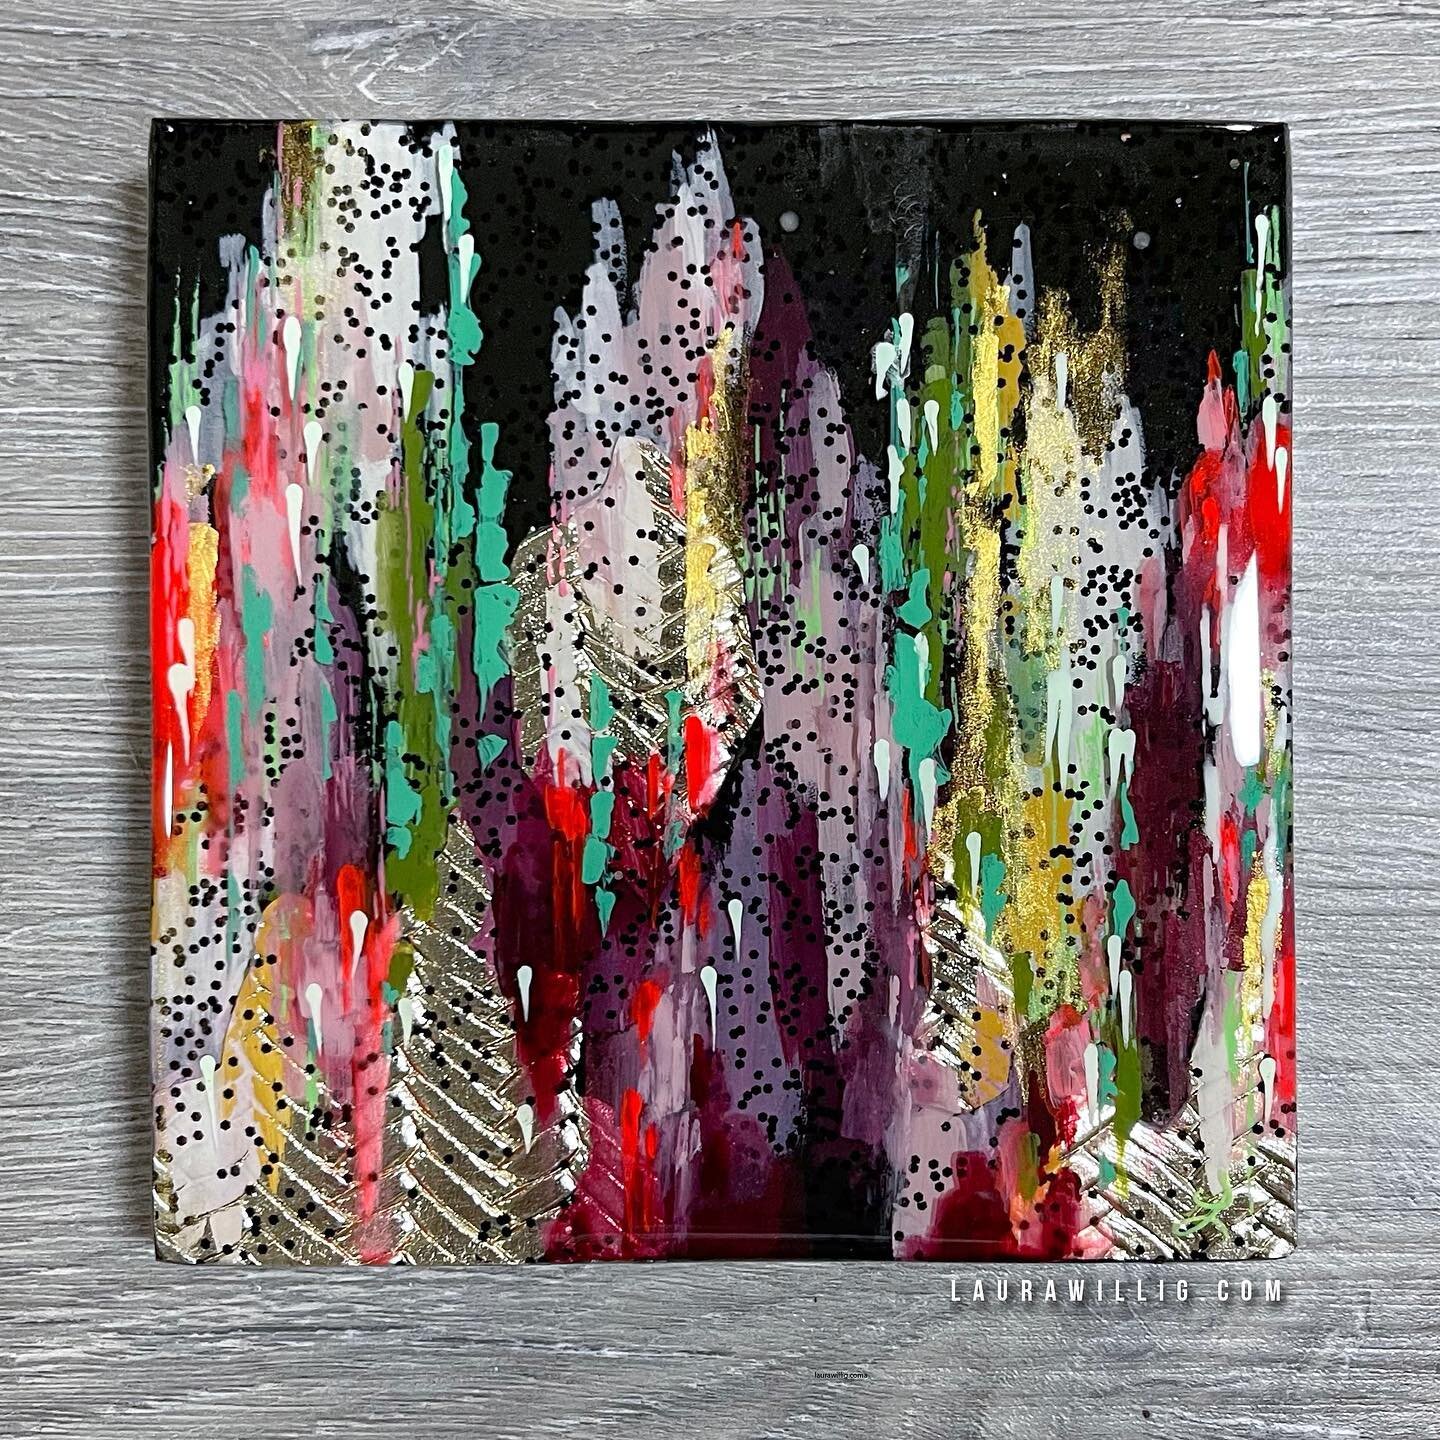 Find this little 5&rdquo; mini up on my website now! LauraWillig.com 

.
.
.
.
#buylocal #buyart #abstractart #abstractpainting #artresin #resinart #miniart #artunder100 #giveart #interiordecor #colorinspiration